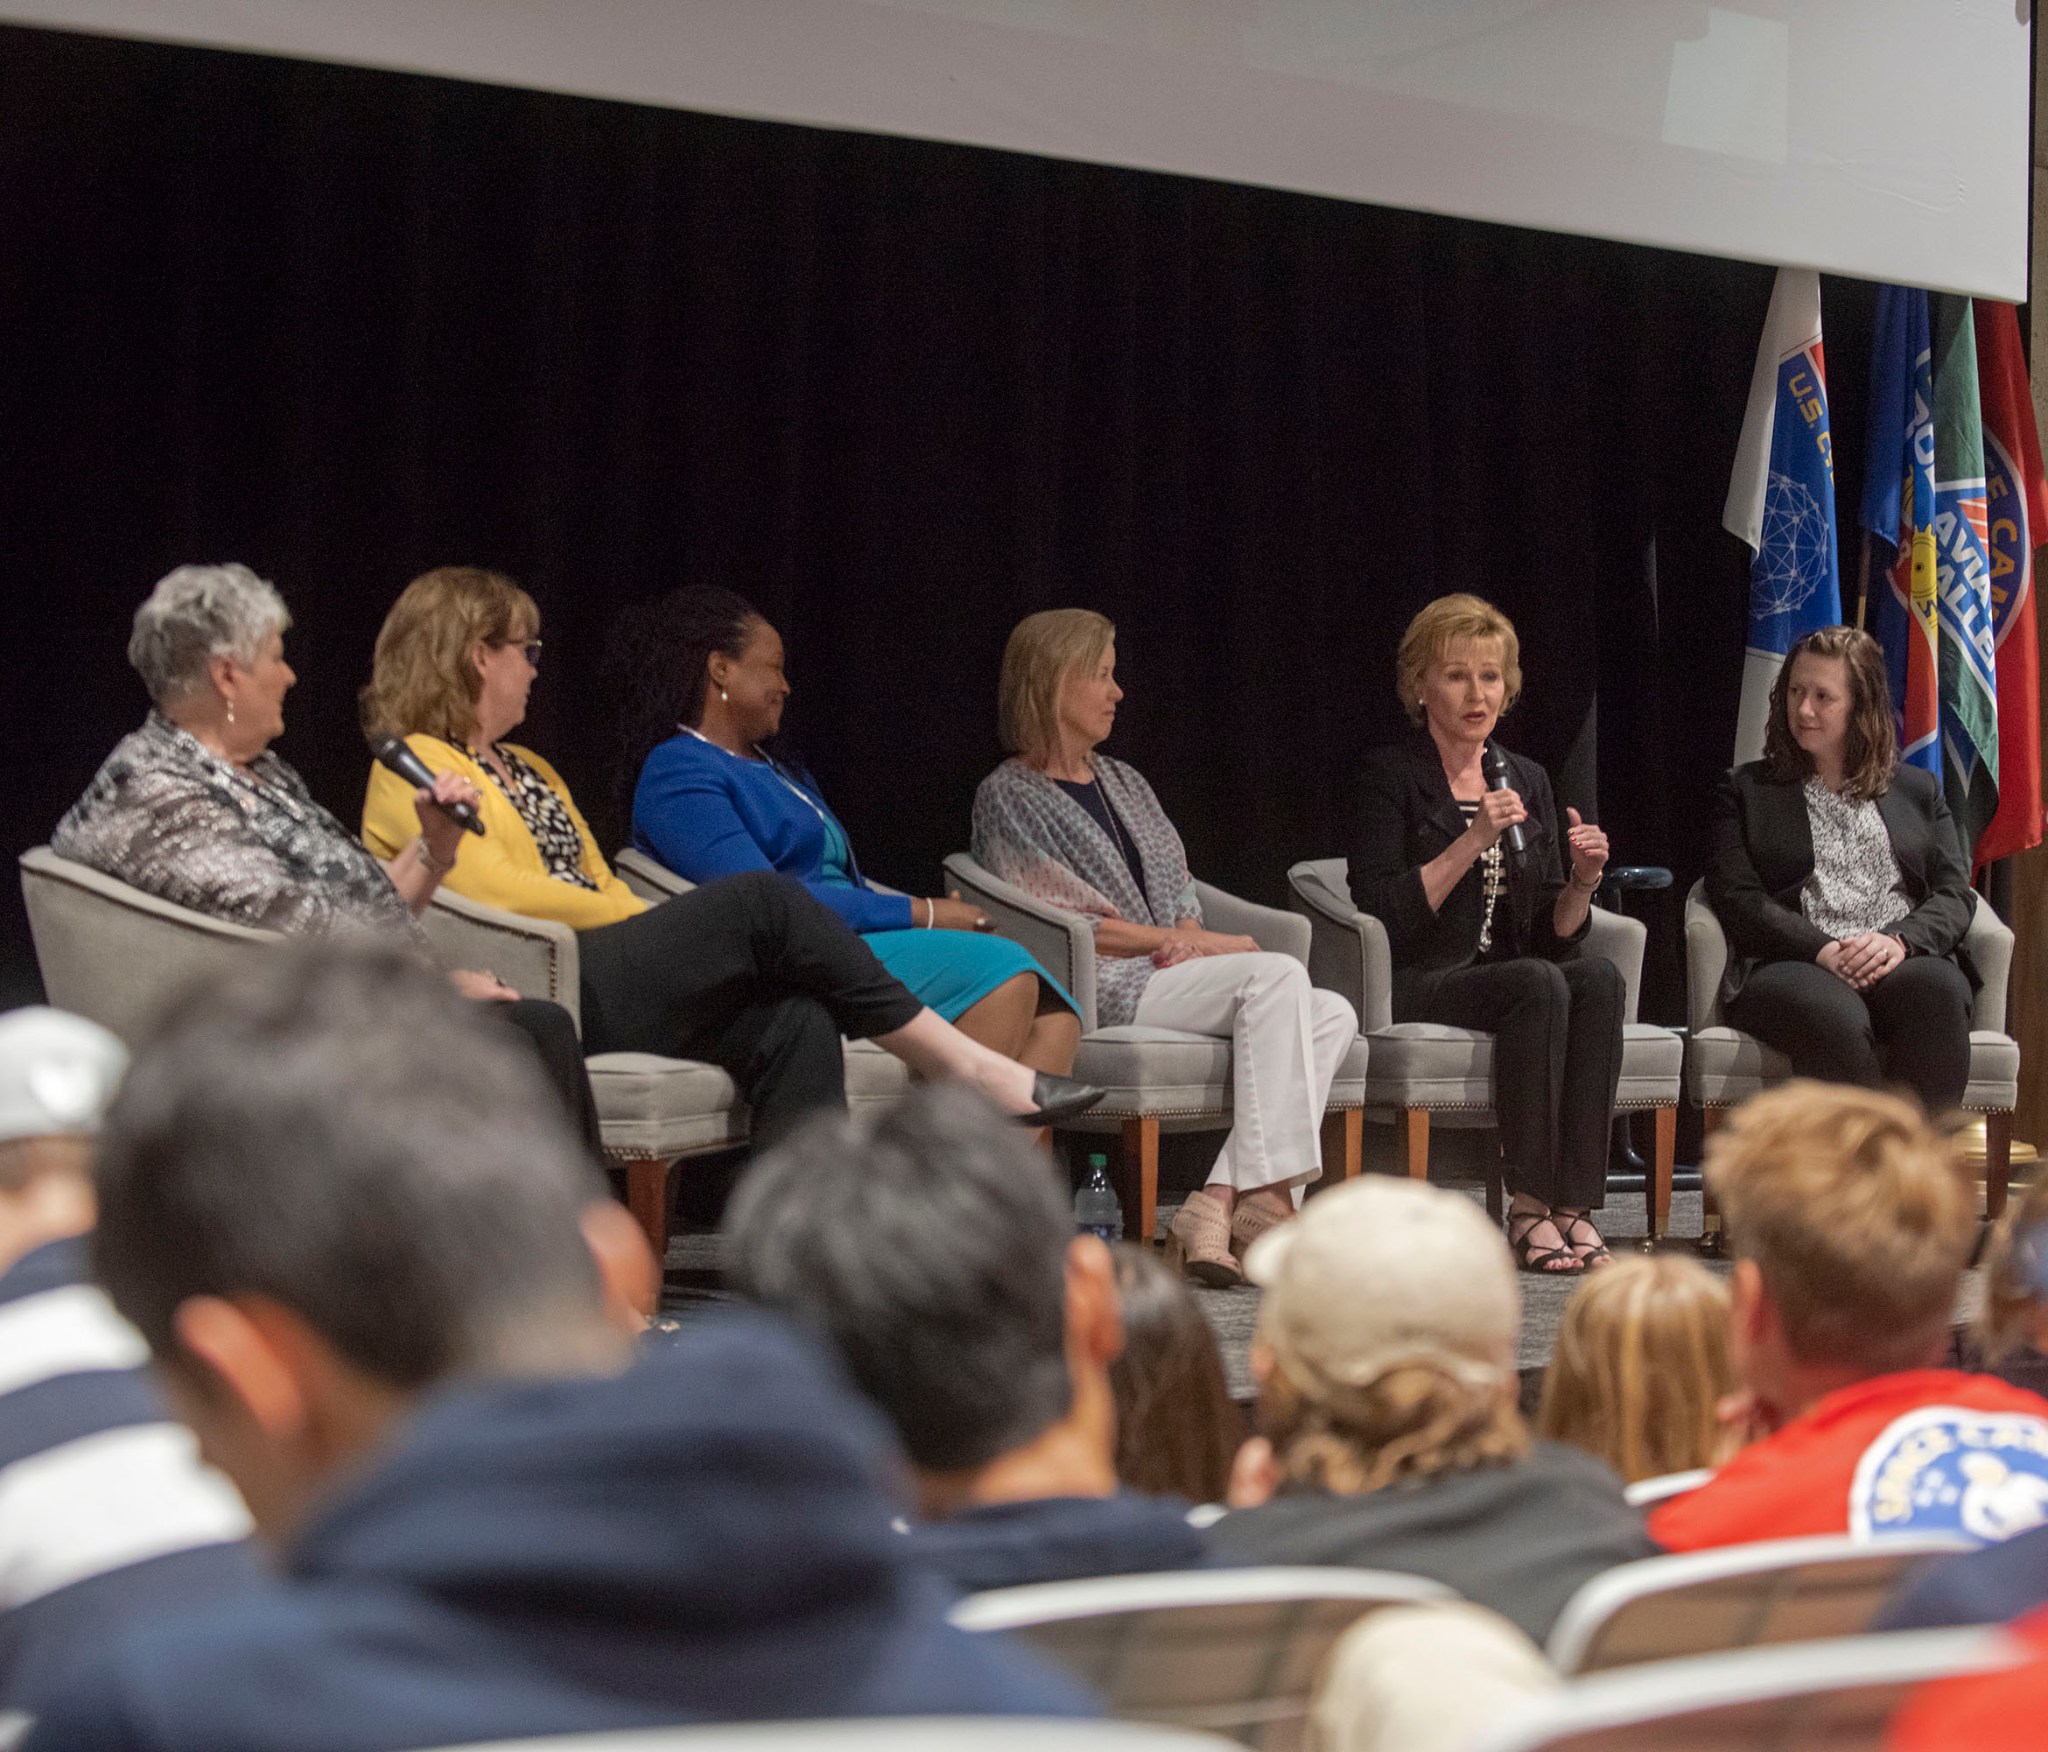 Women from NASA Marshall Space Flight Center’s past and present speak at the U.S. Space & Rocket Center’s Pass the Torch event.